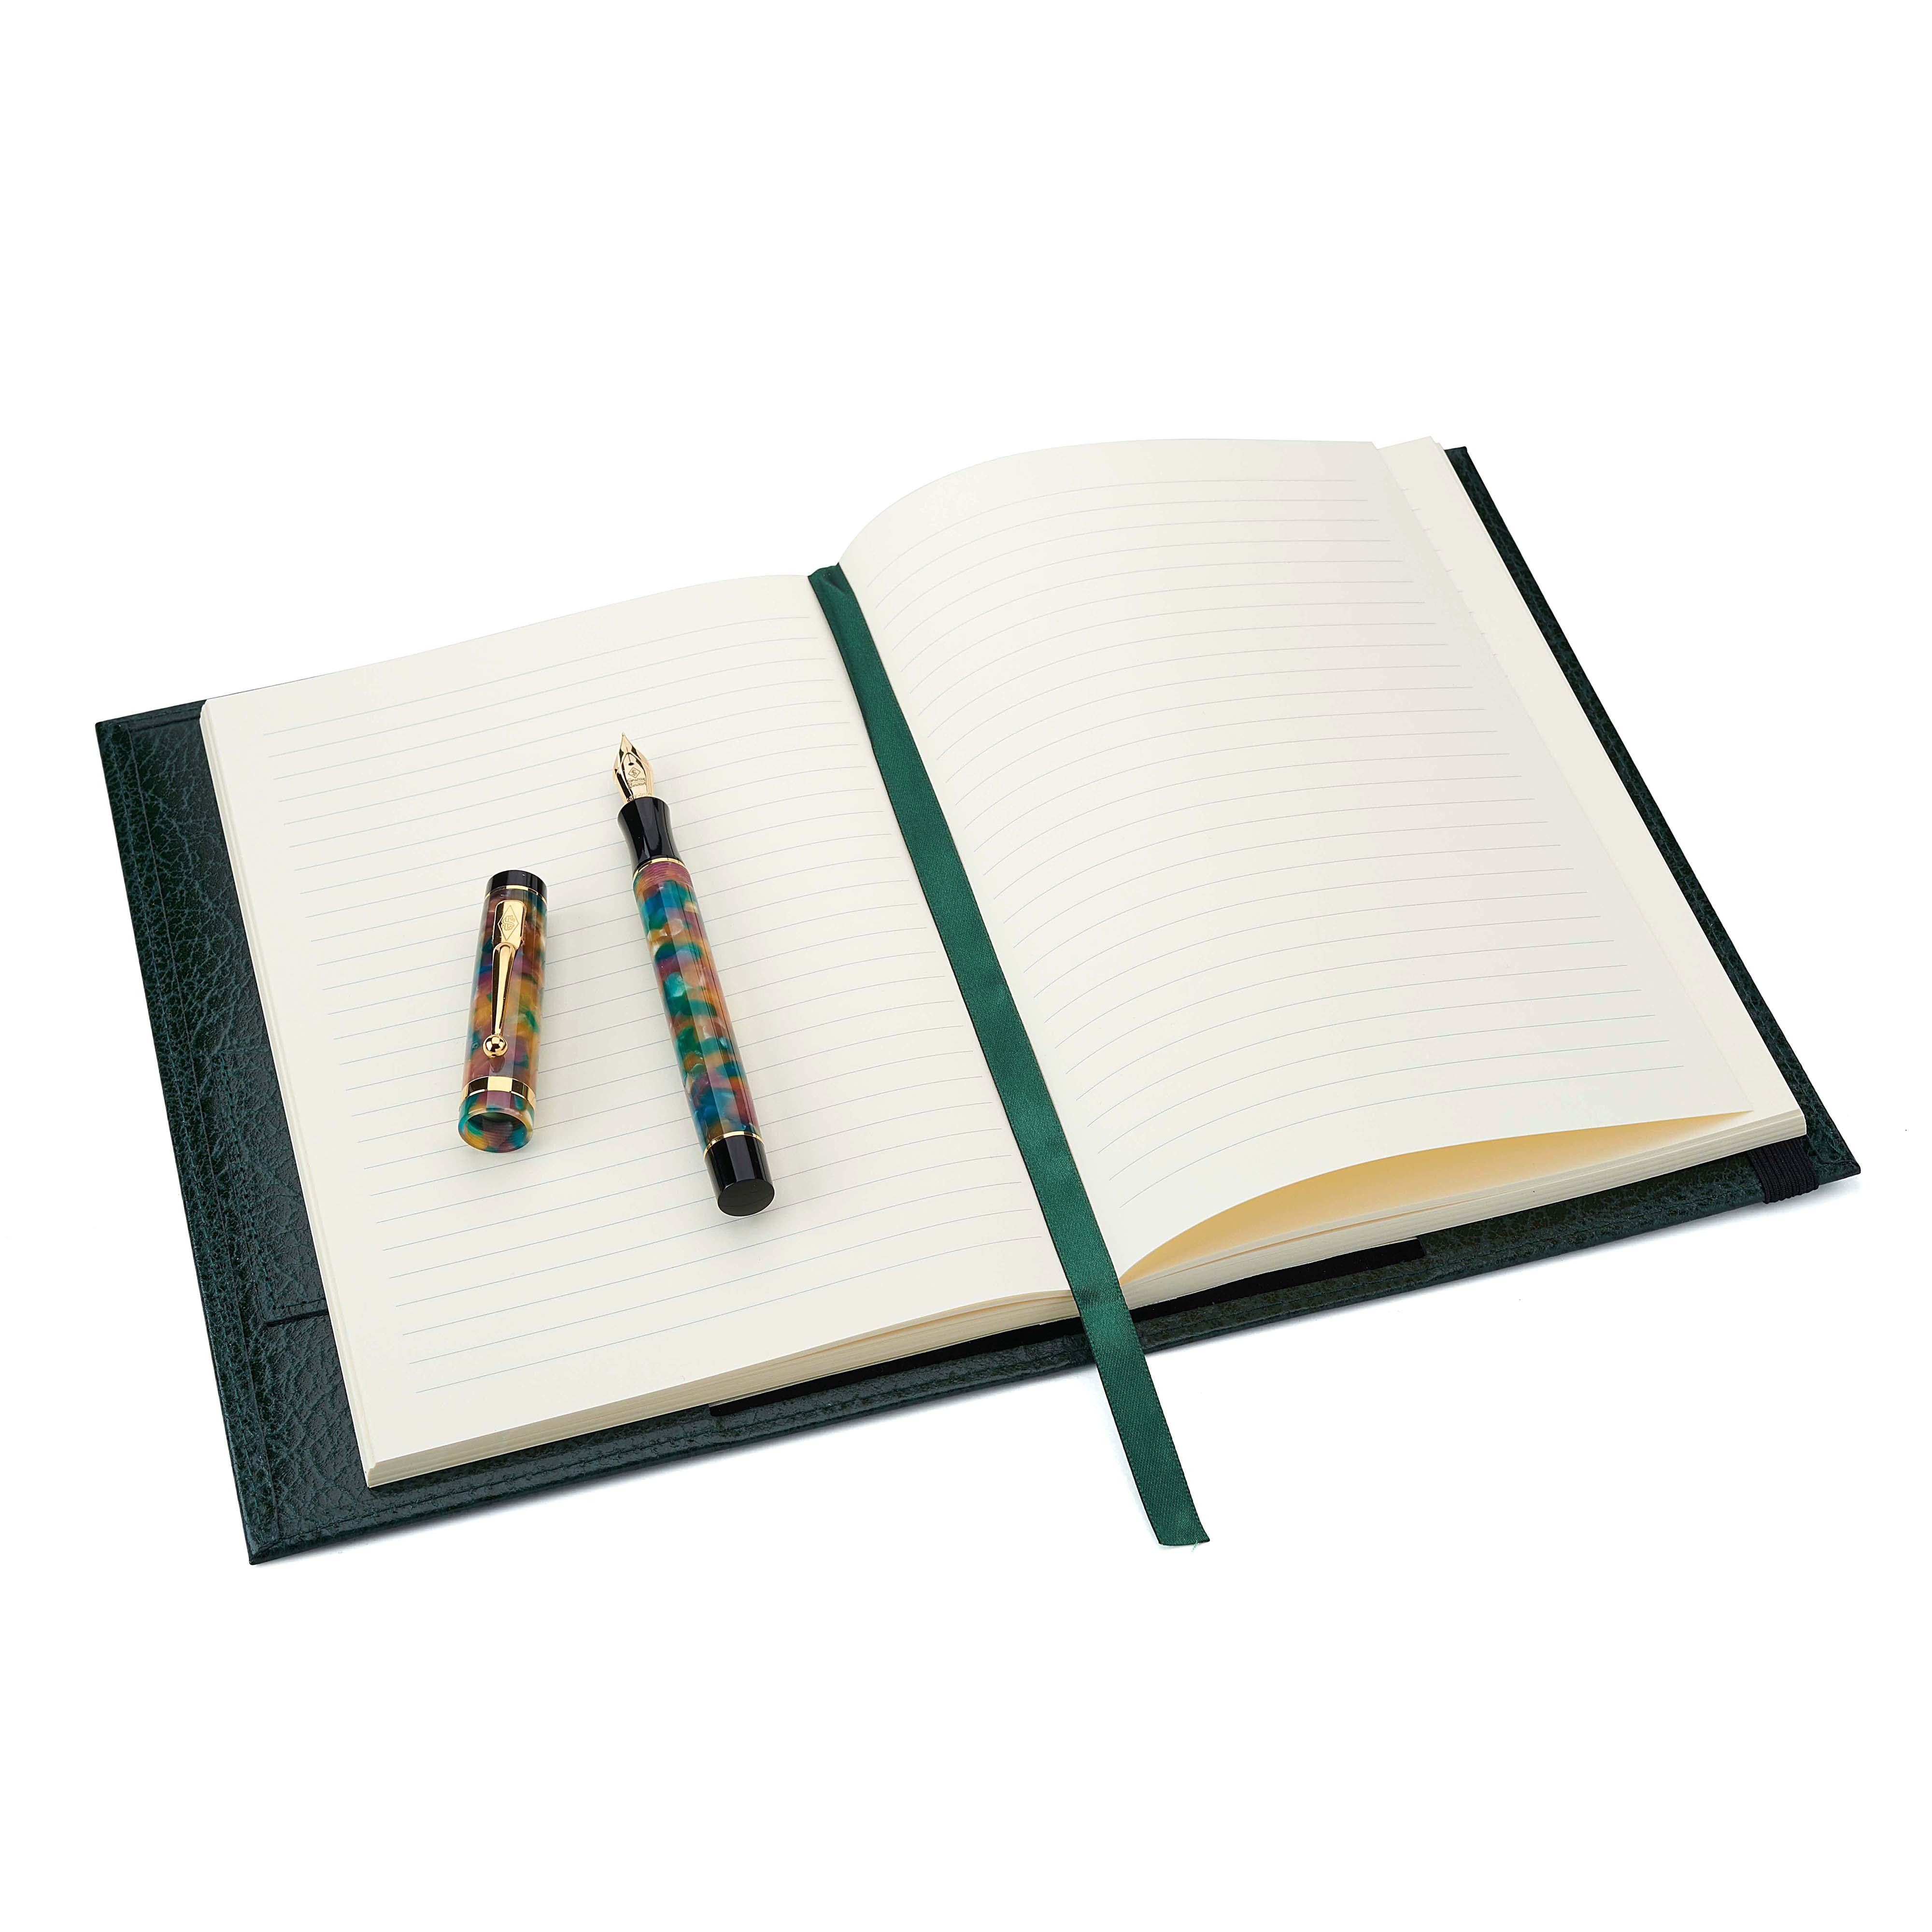 A premium notebook made by Conway Stewart, featuring a leather cover and high-quality paper